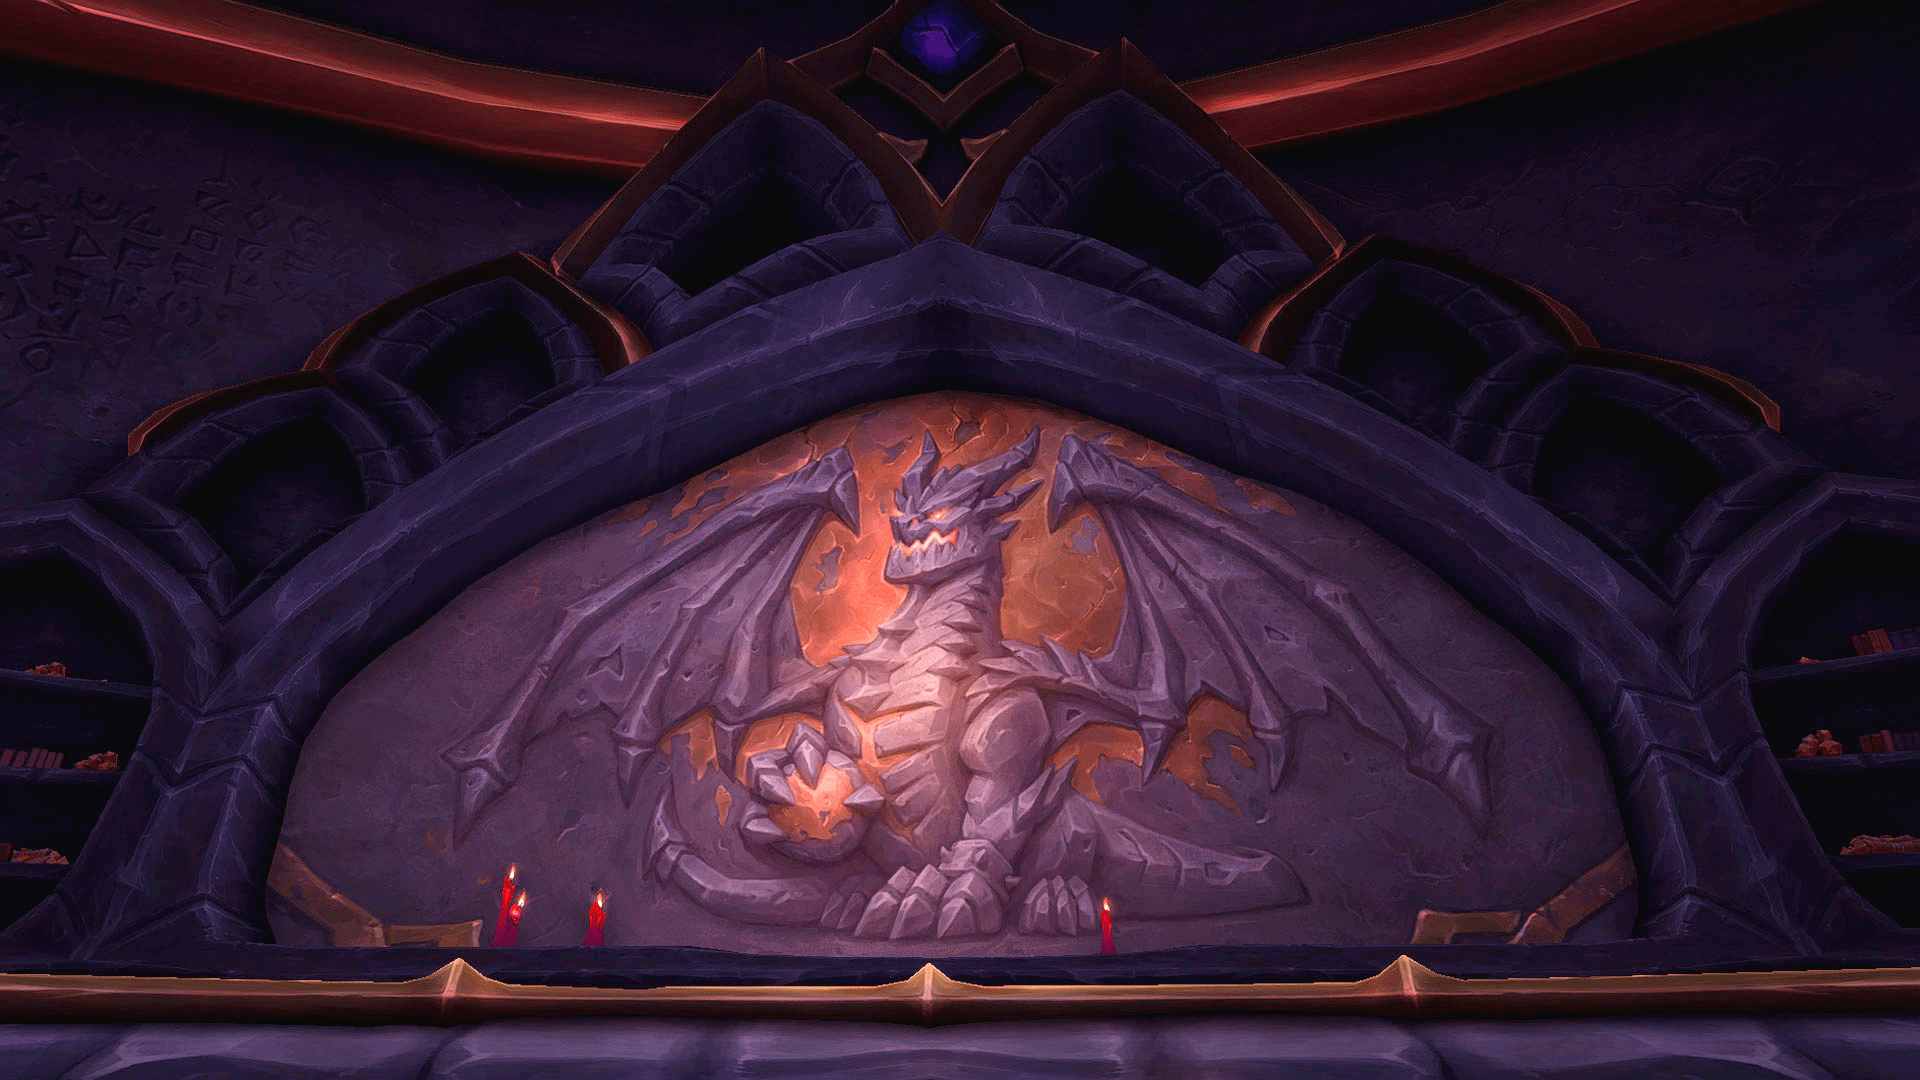 Mural depicting Deathwing